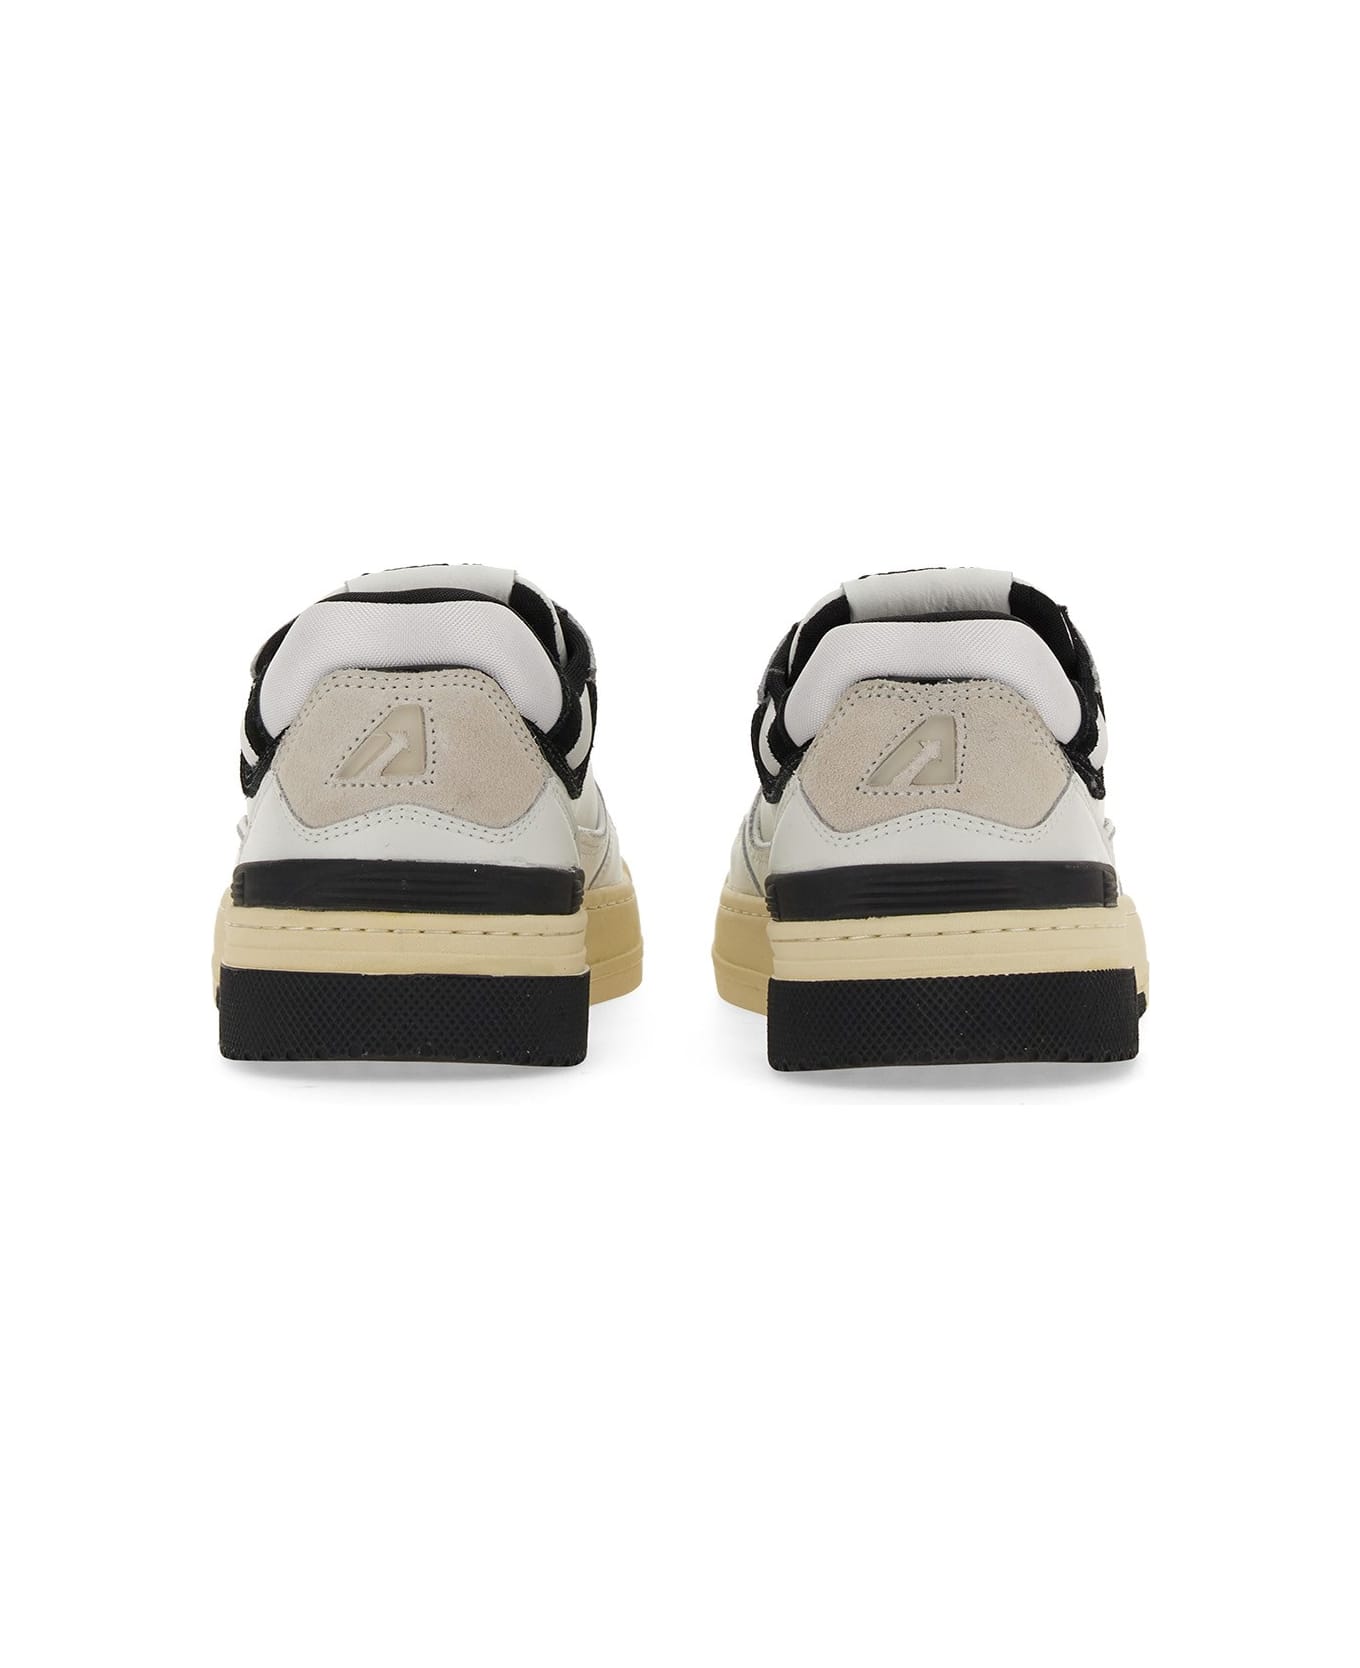 Autry Clc Low Sneakers - BIANCO スニーカー